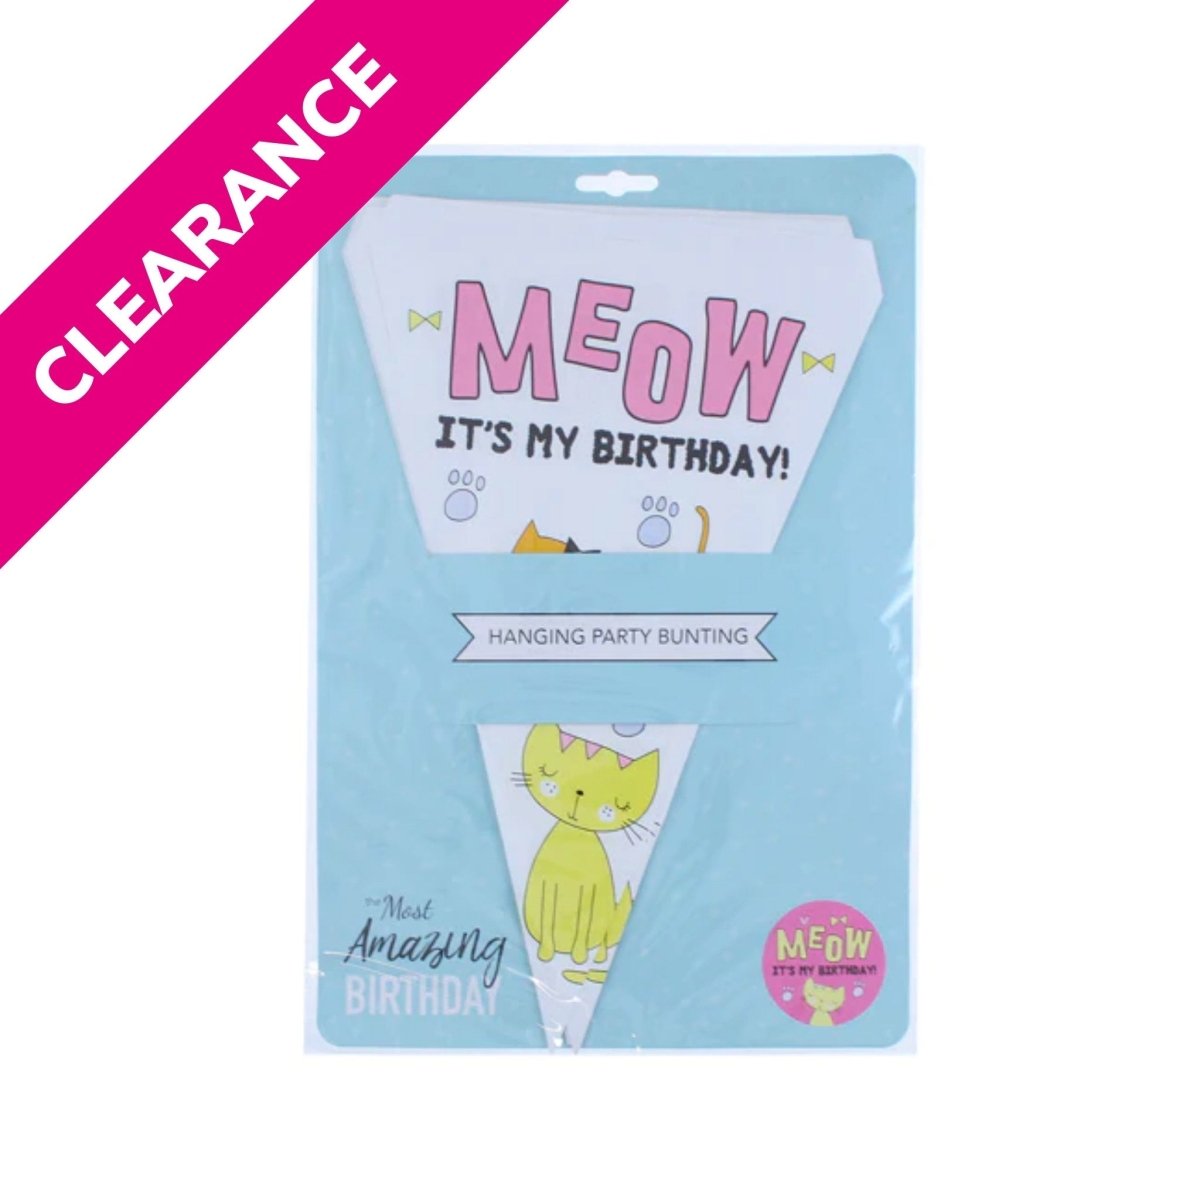 Meow Hanging Party Bunting - Kids Party Craft